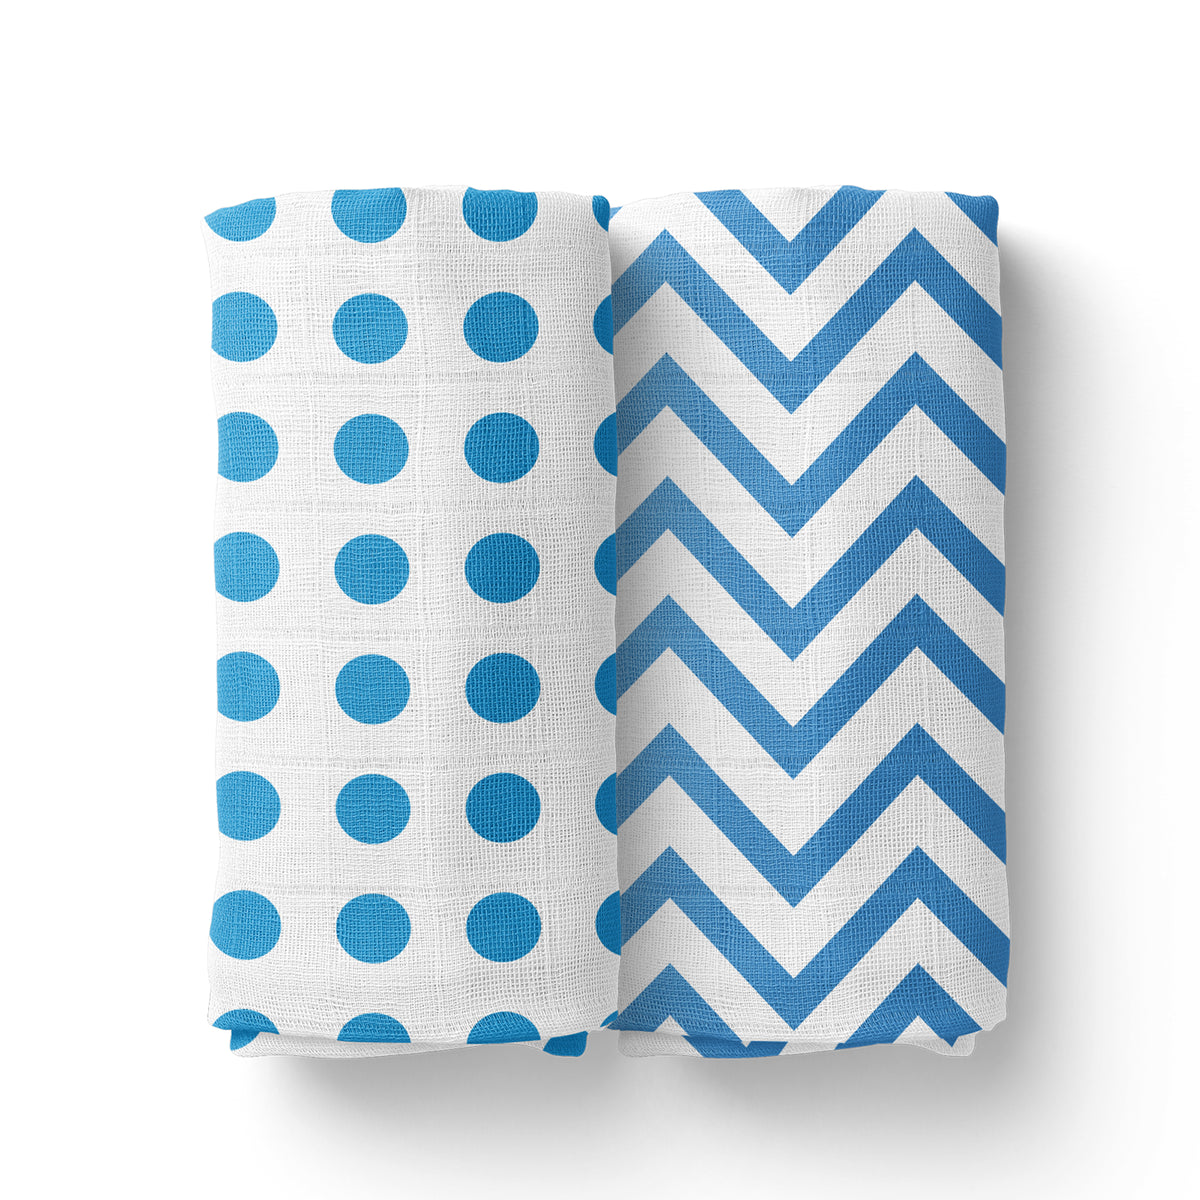 Mom's Home Organic Baby Muslin Swaddle - 0-12 Months - Pack of 2 - ZigZag &amp; Polka Dot -Blue